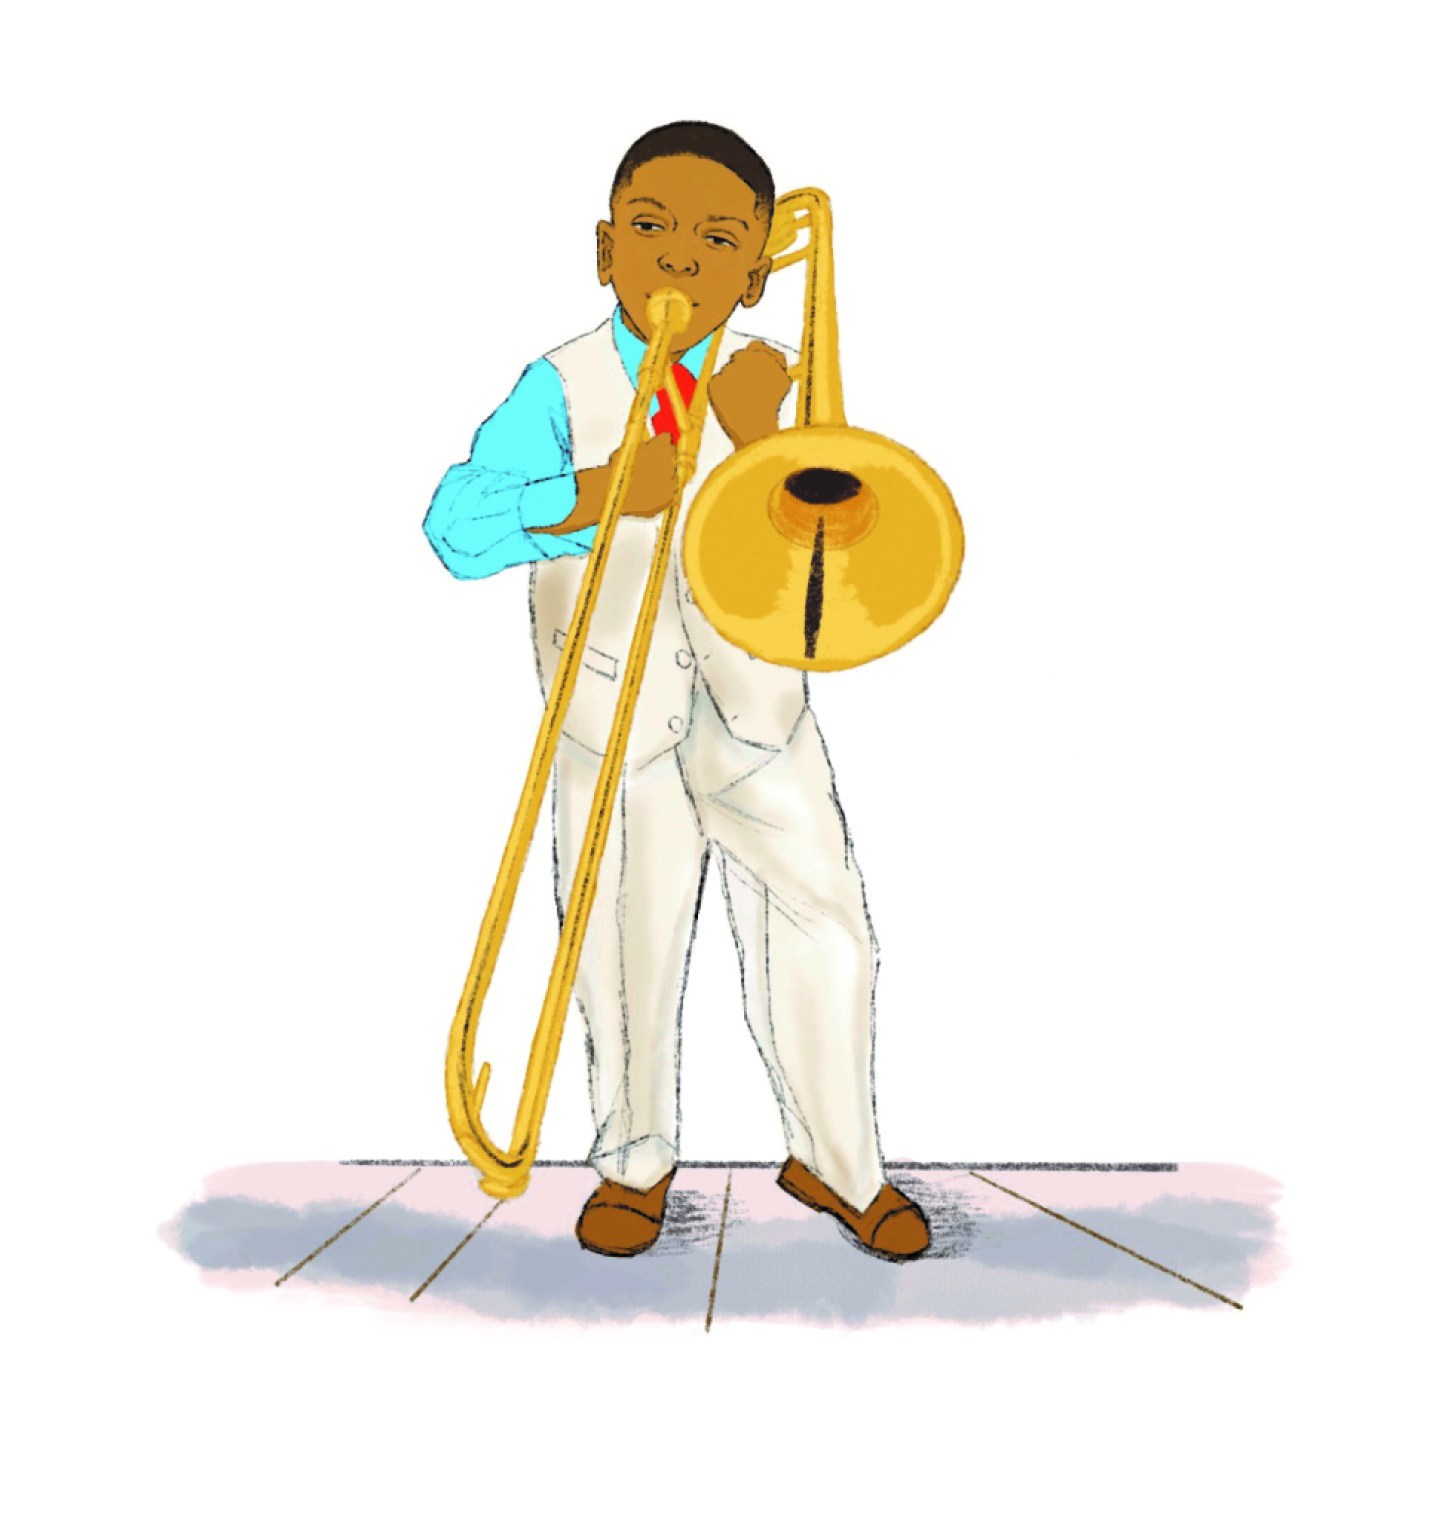 Young Boy with Trombone illustration from A Child's Introduction to Jazz